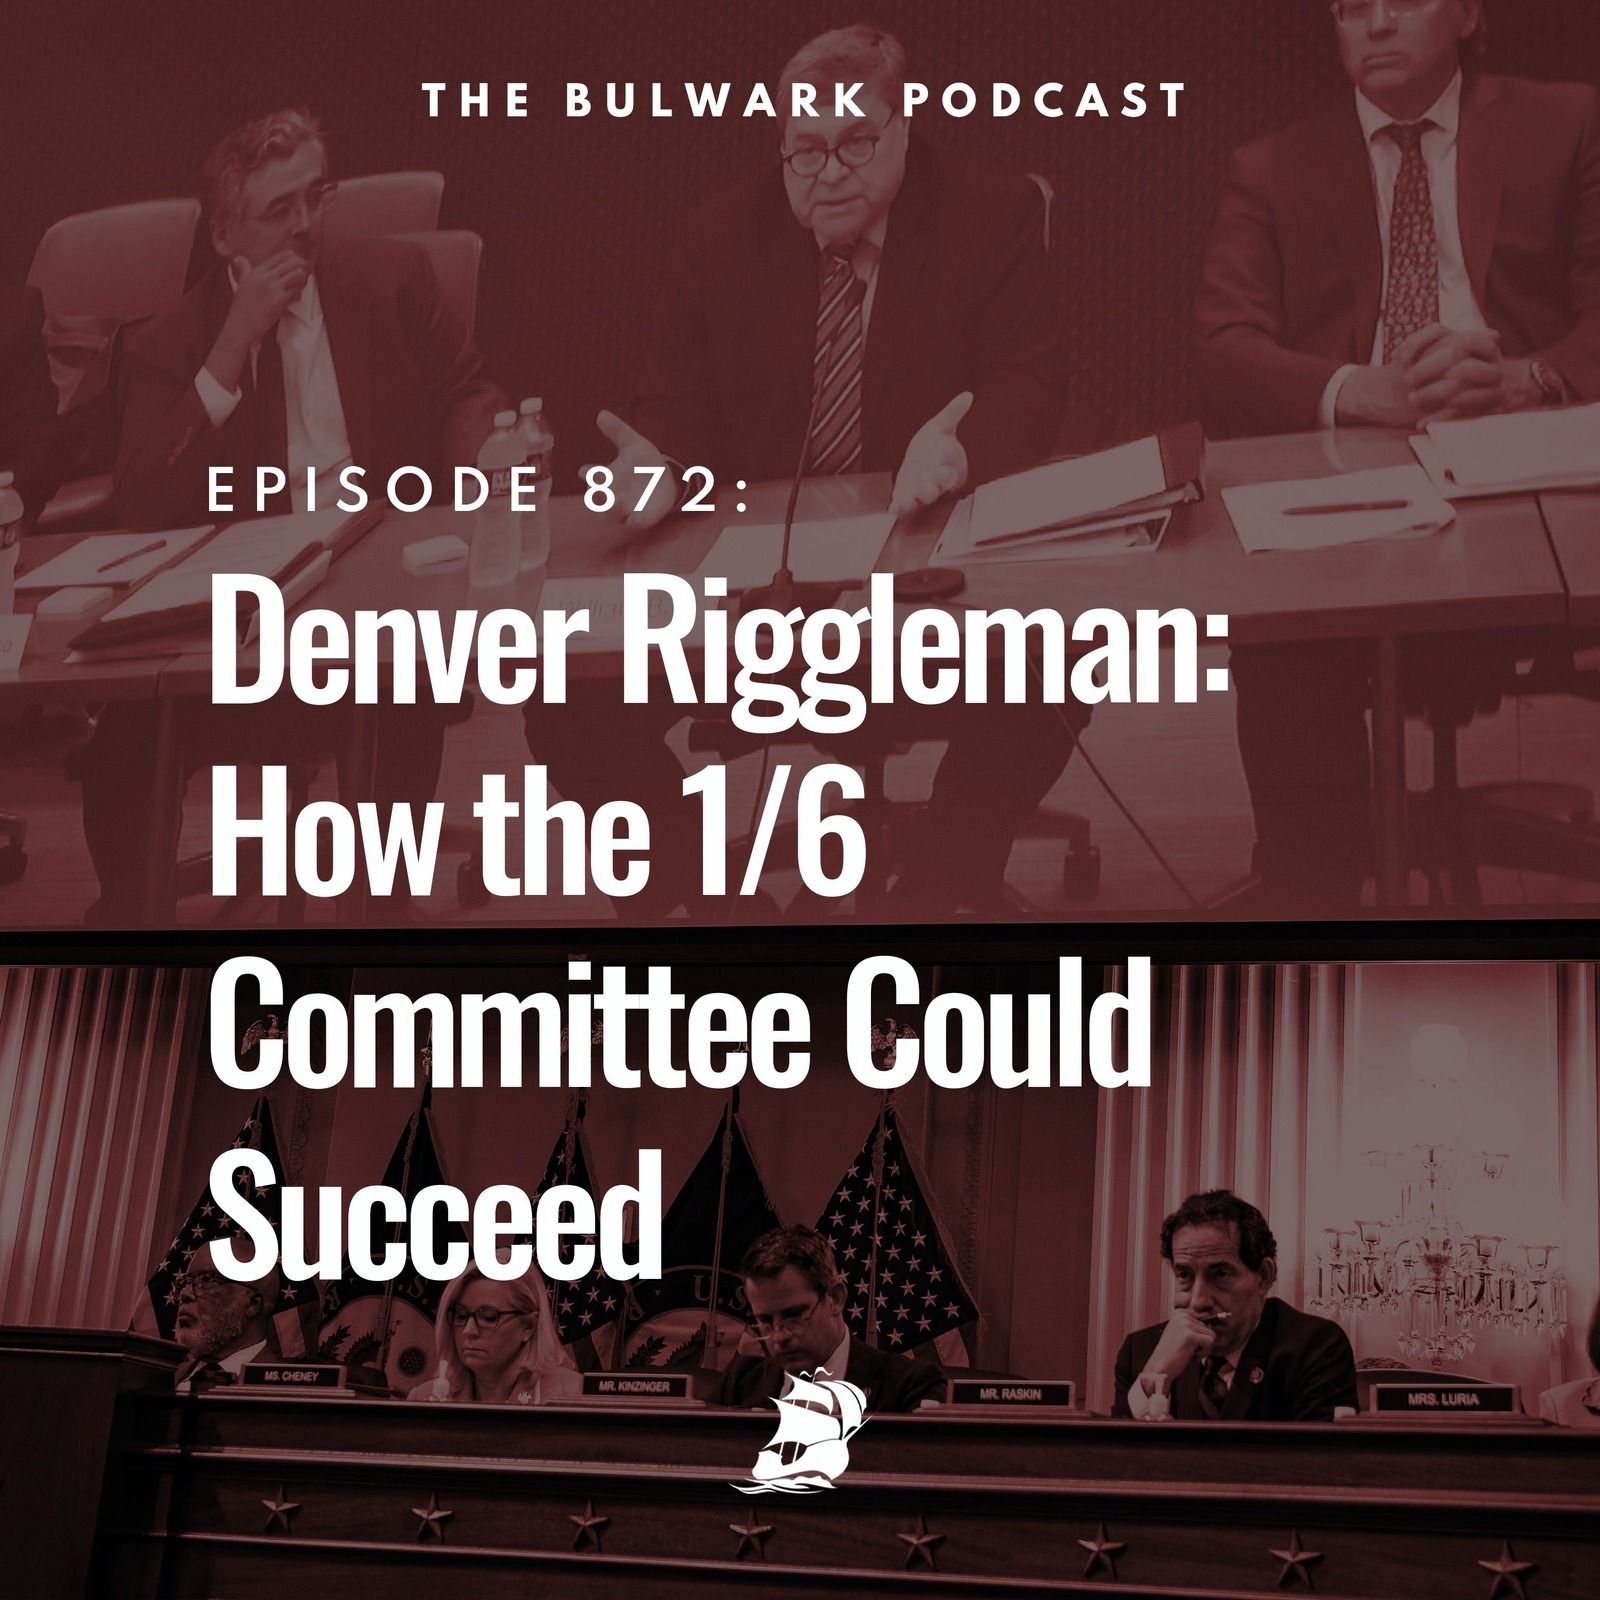 Denver Riggleman: How the 1/6 Committee could succeed